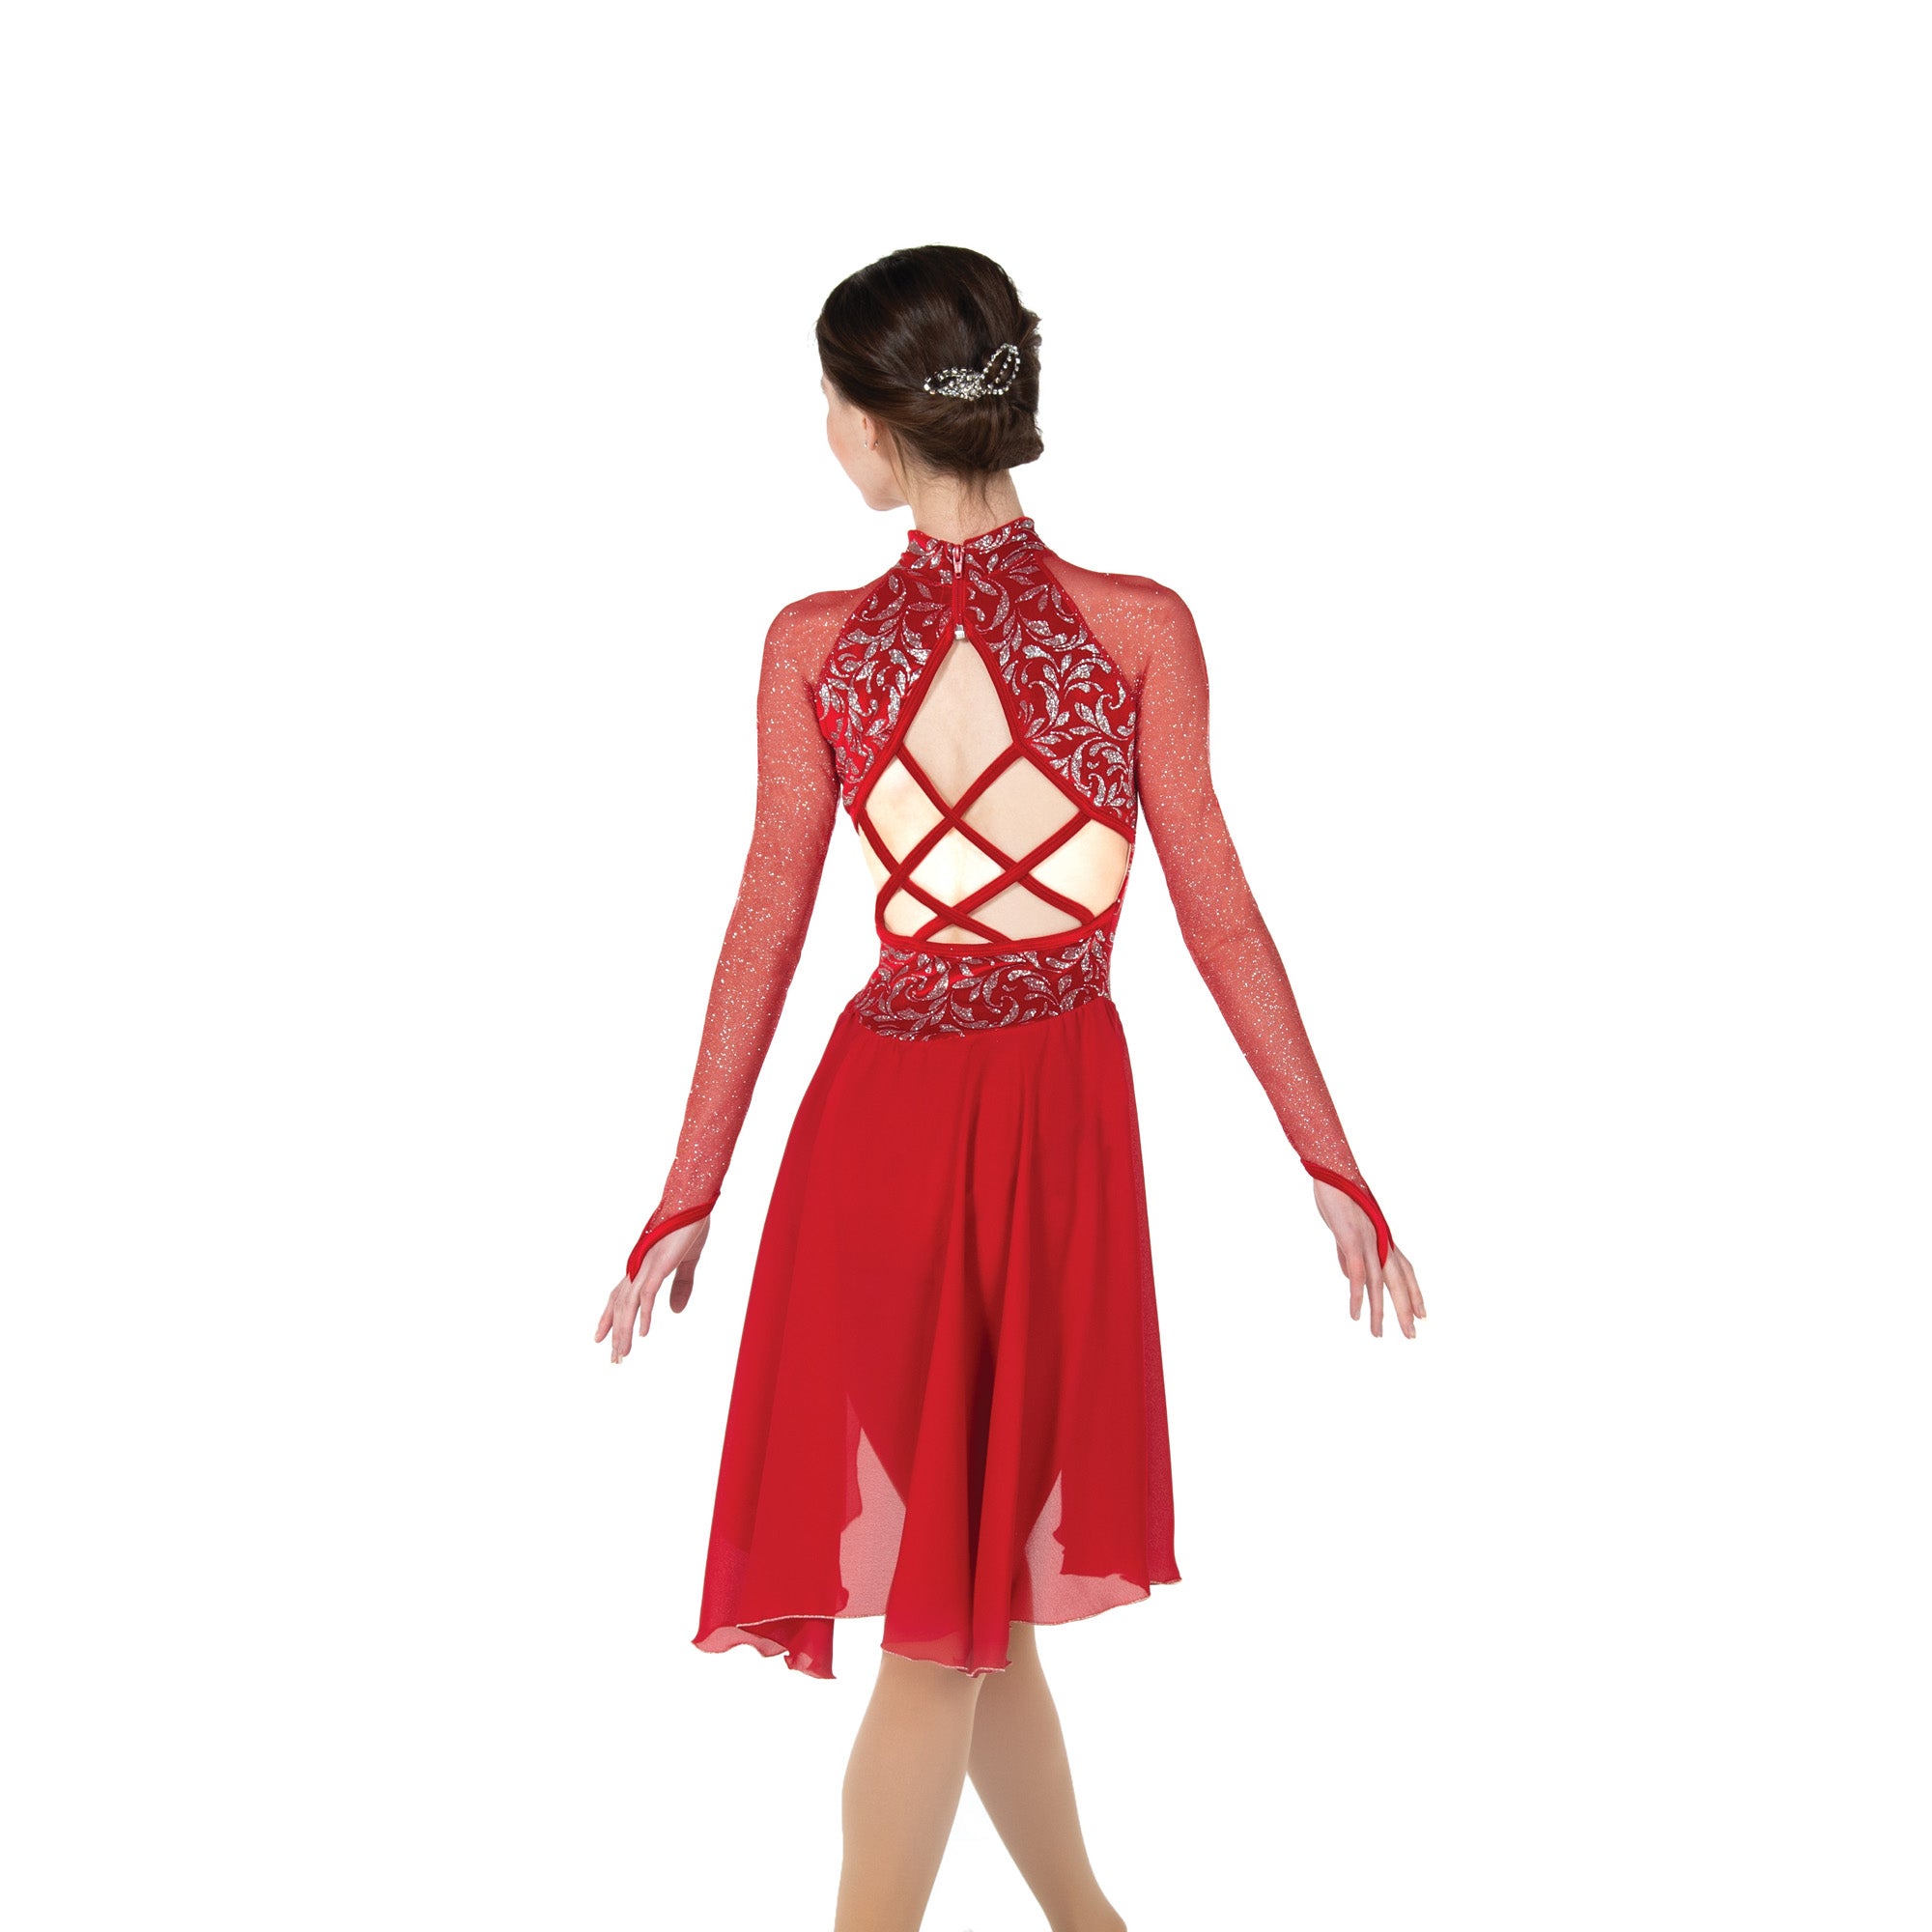 100 Trellistep Dance Dress in Red by Jerry's